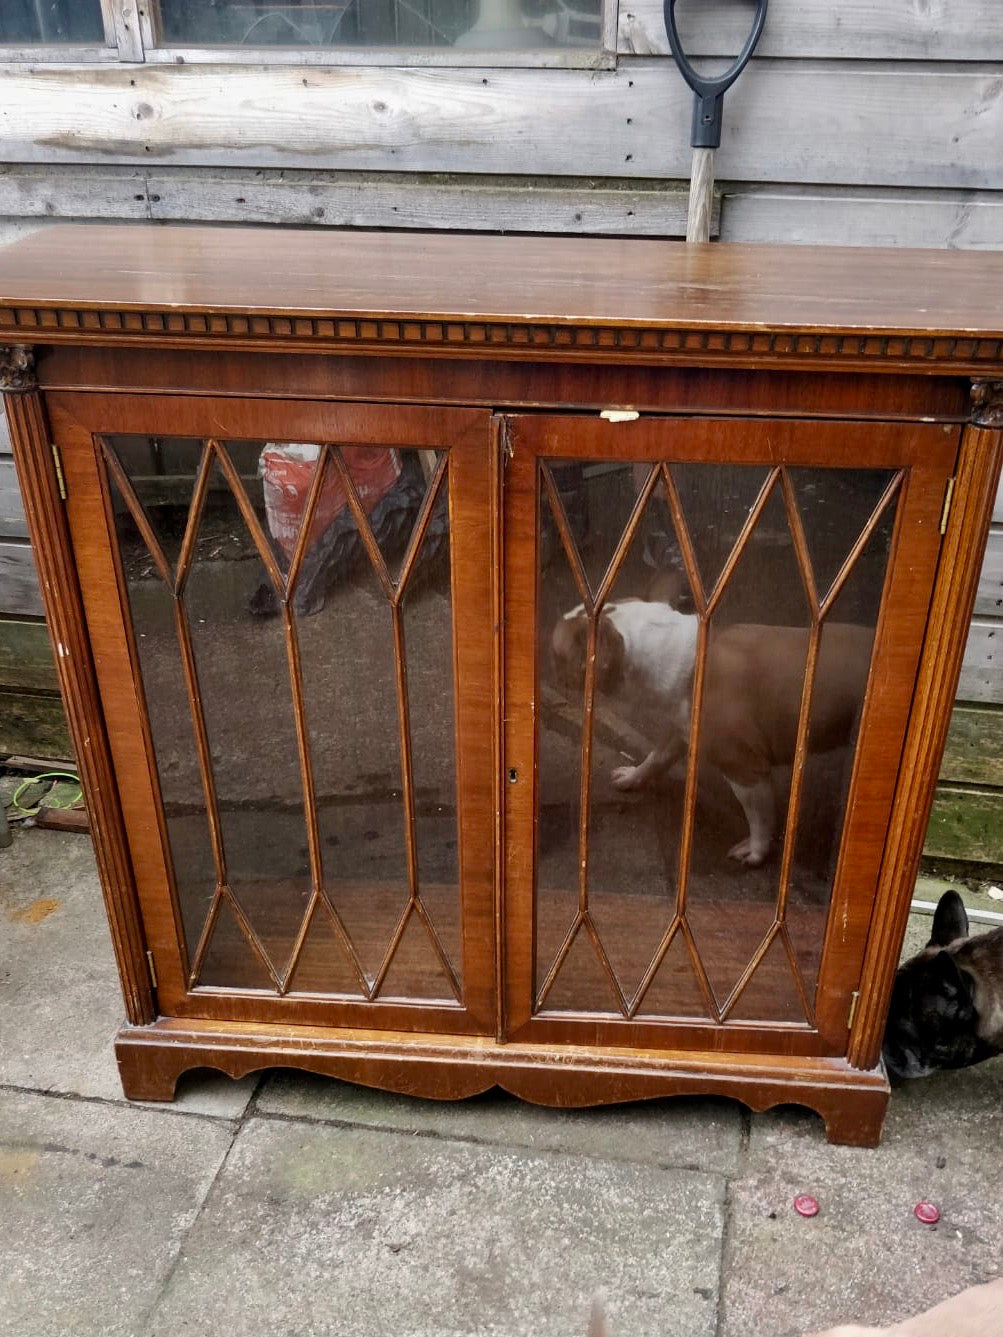 Vintage  glass fronted book case available for painting